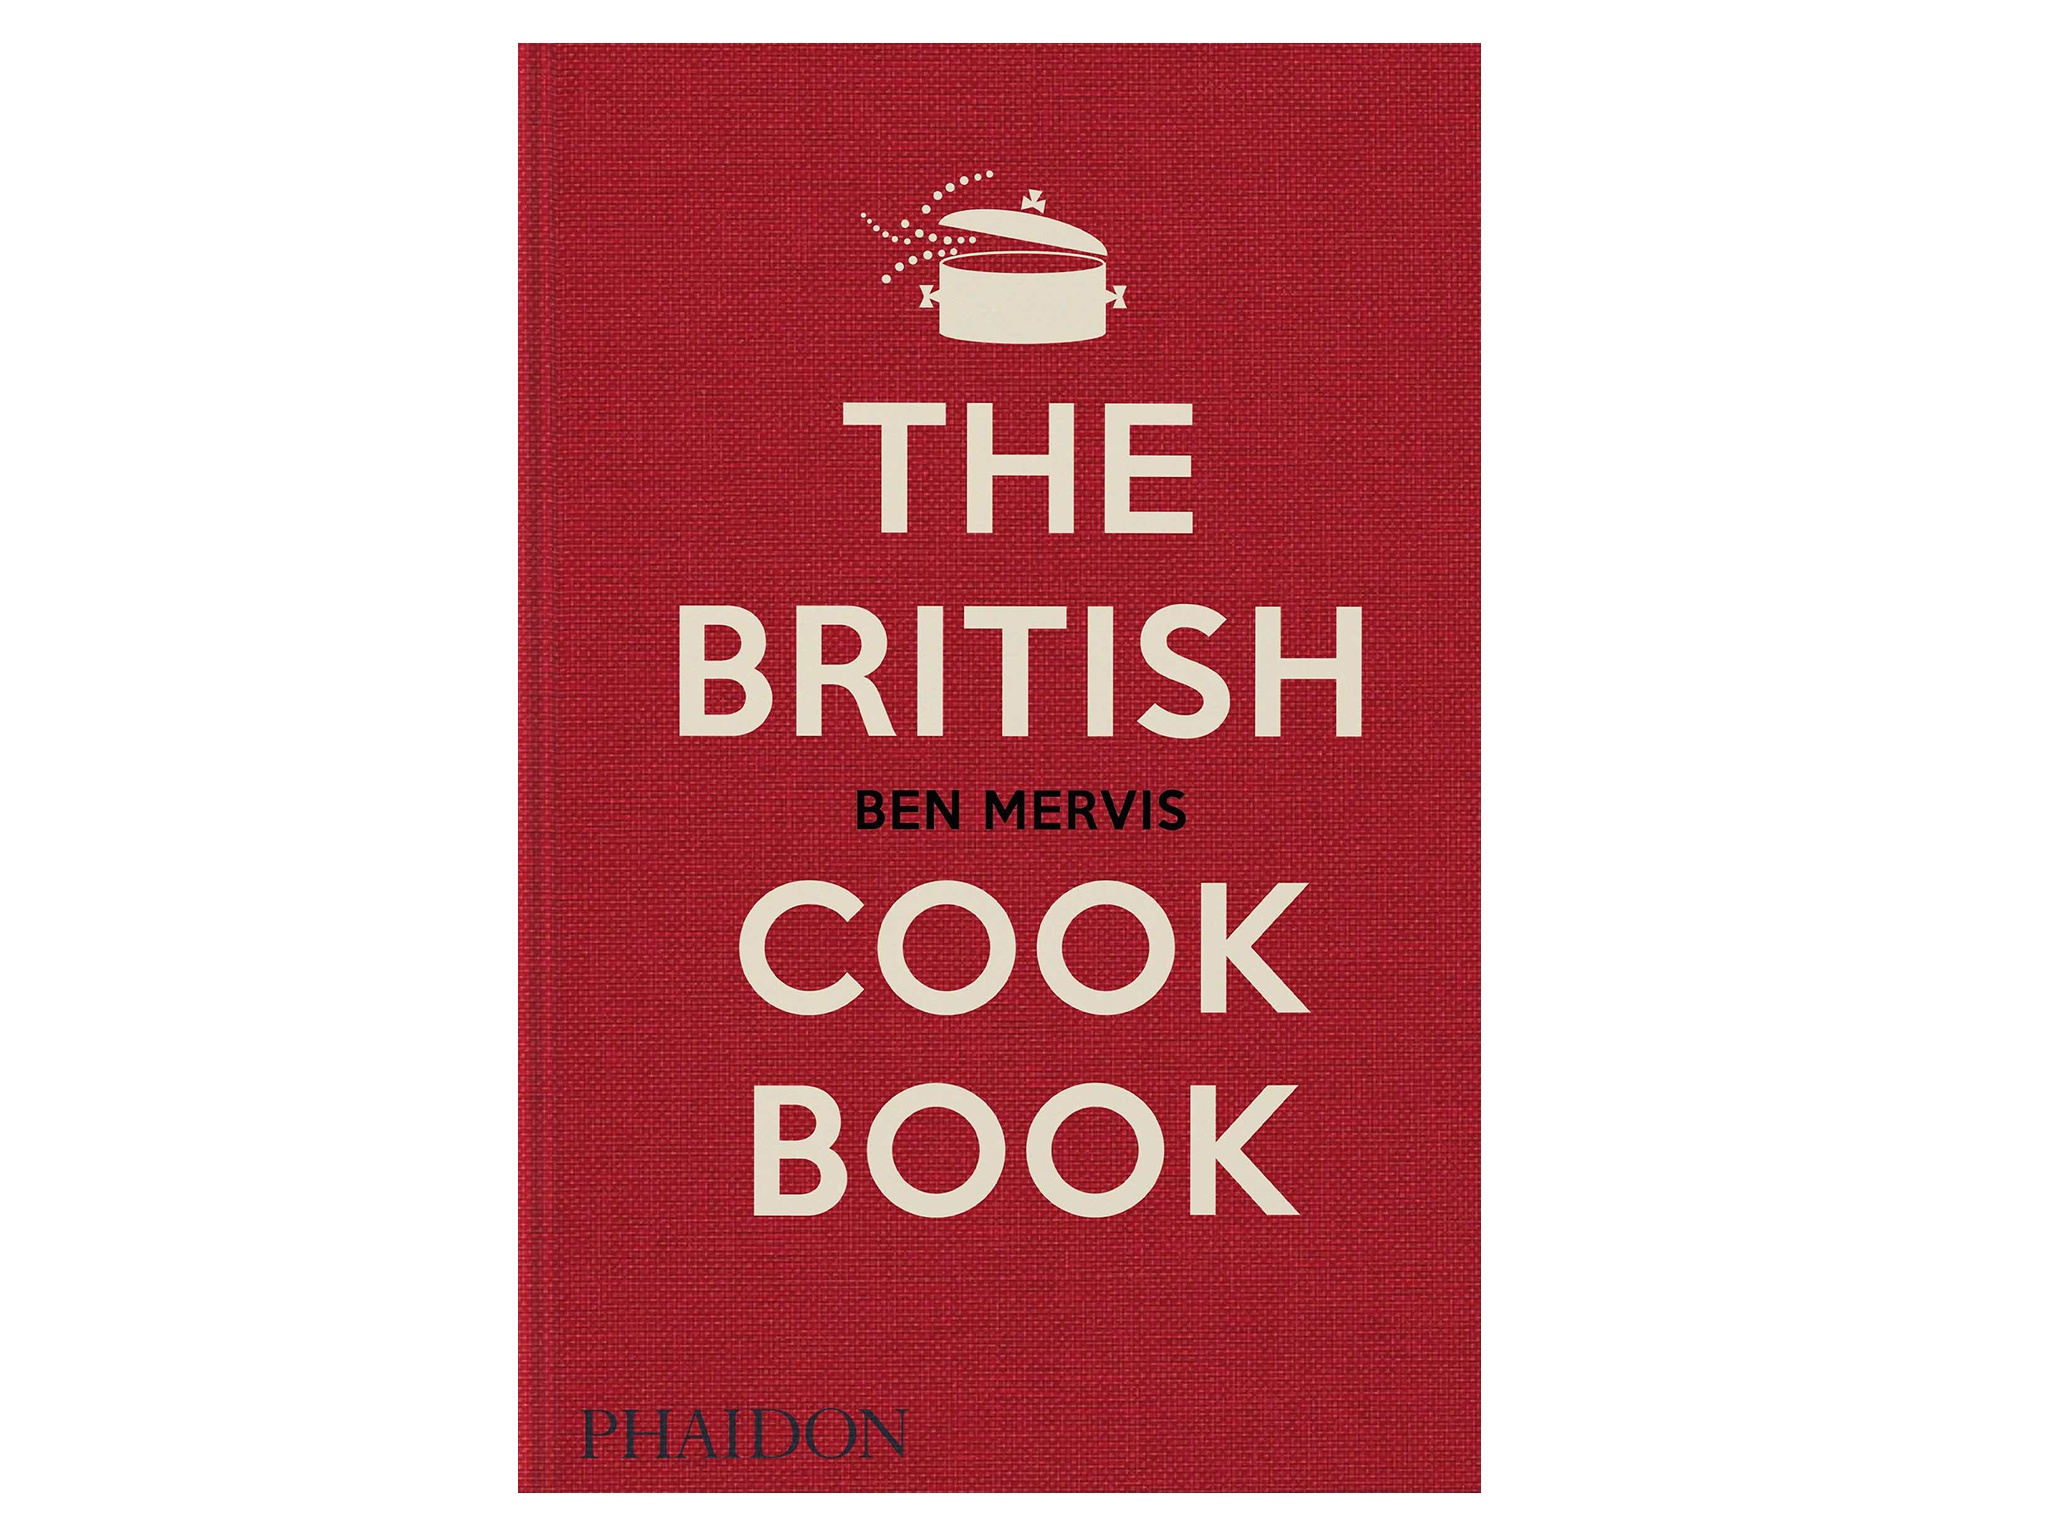 ‘The British Cookbook’ by Ben Mervis, published by Phaidon